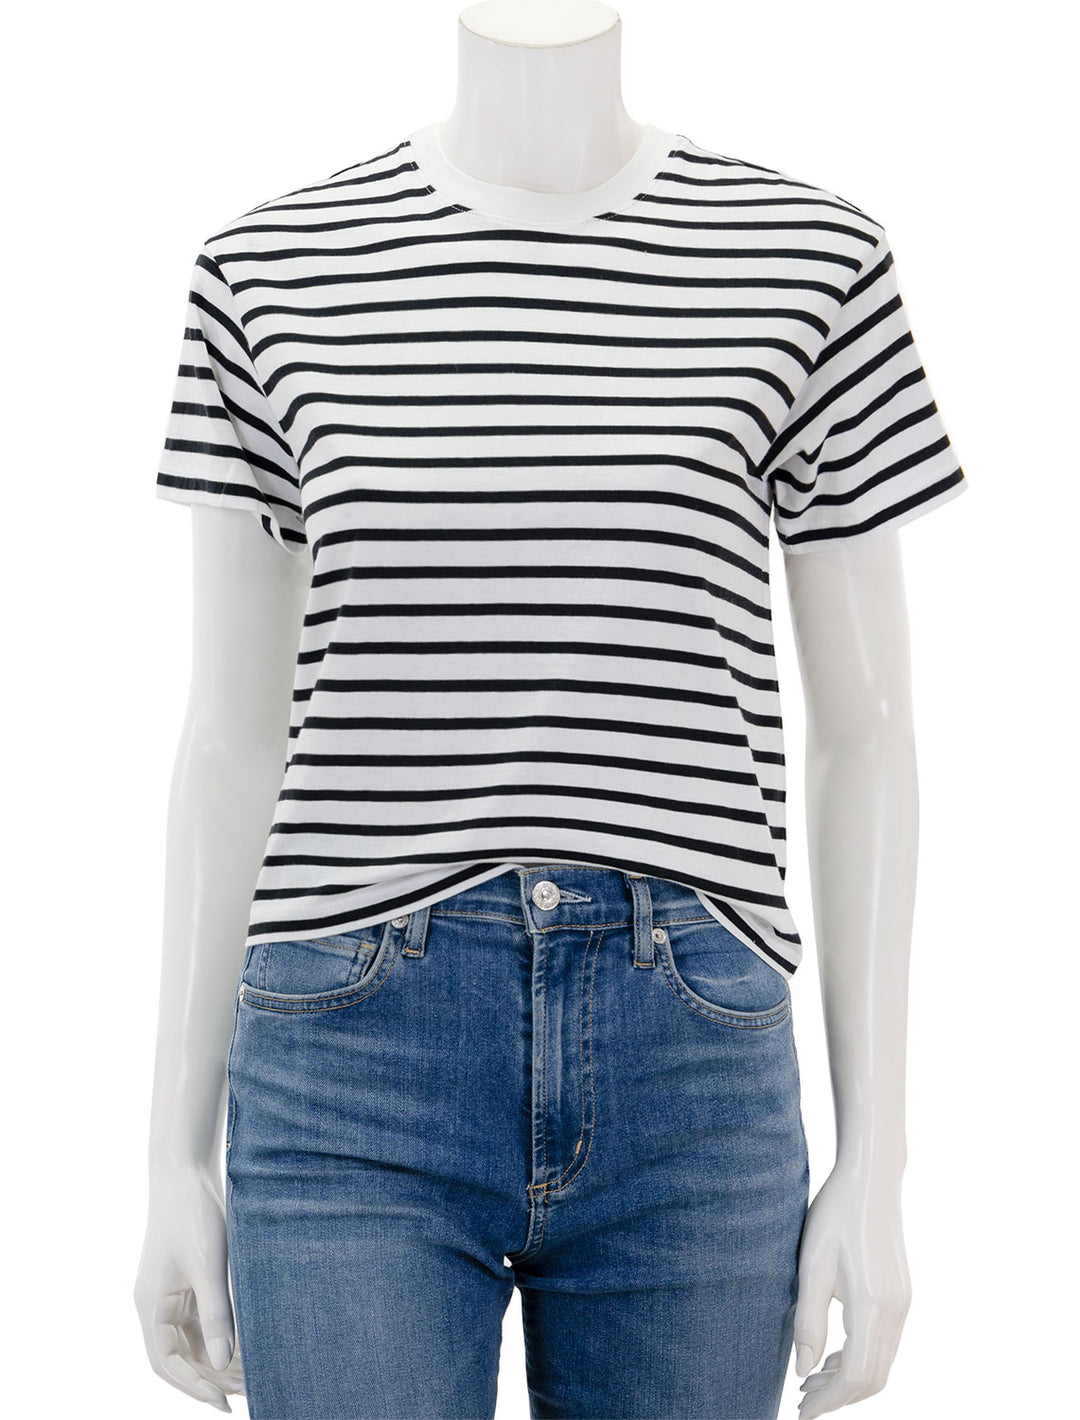 Front view of ATM's classic jersey short sleeve stripe boy tee in black and white stripe.